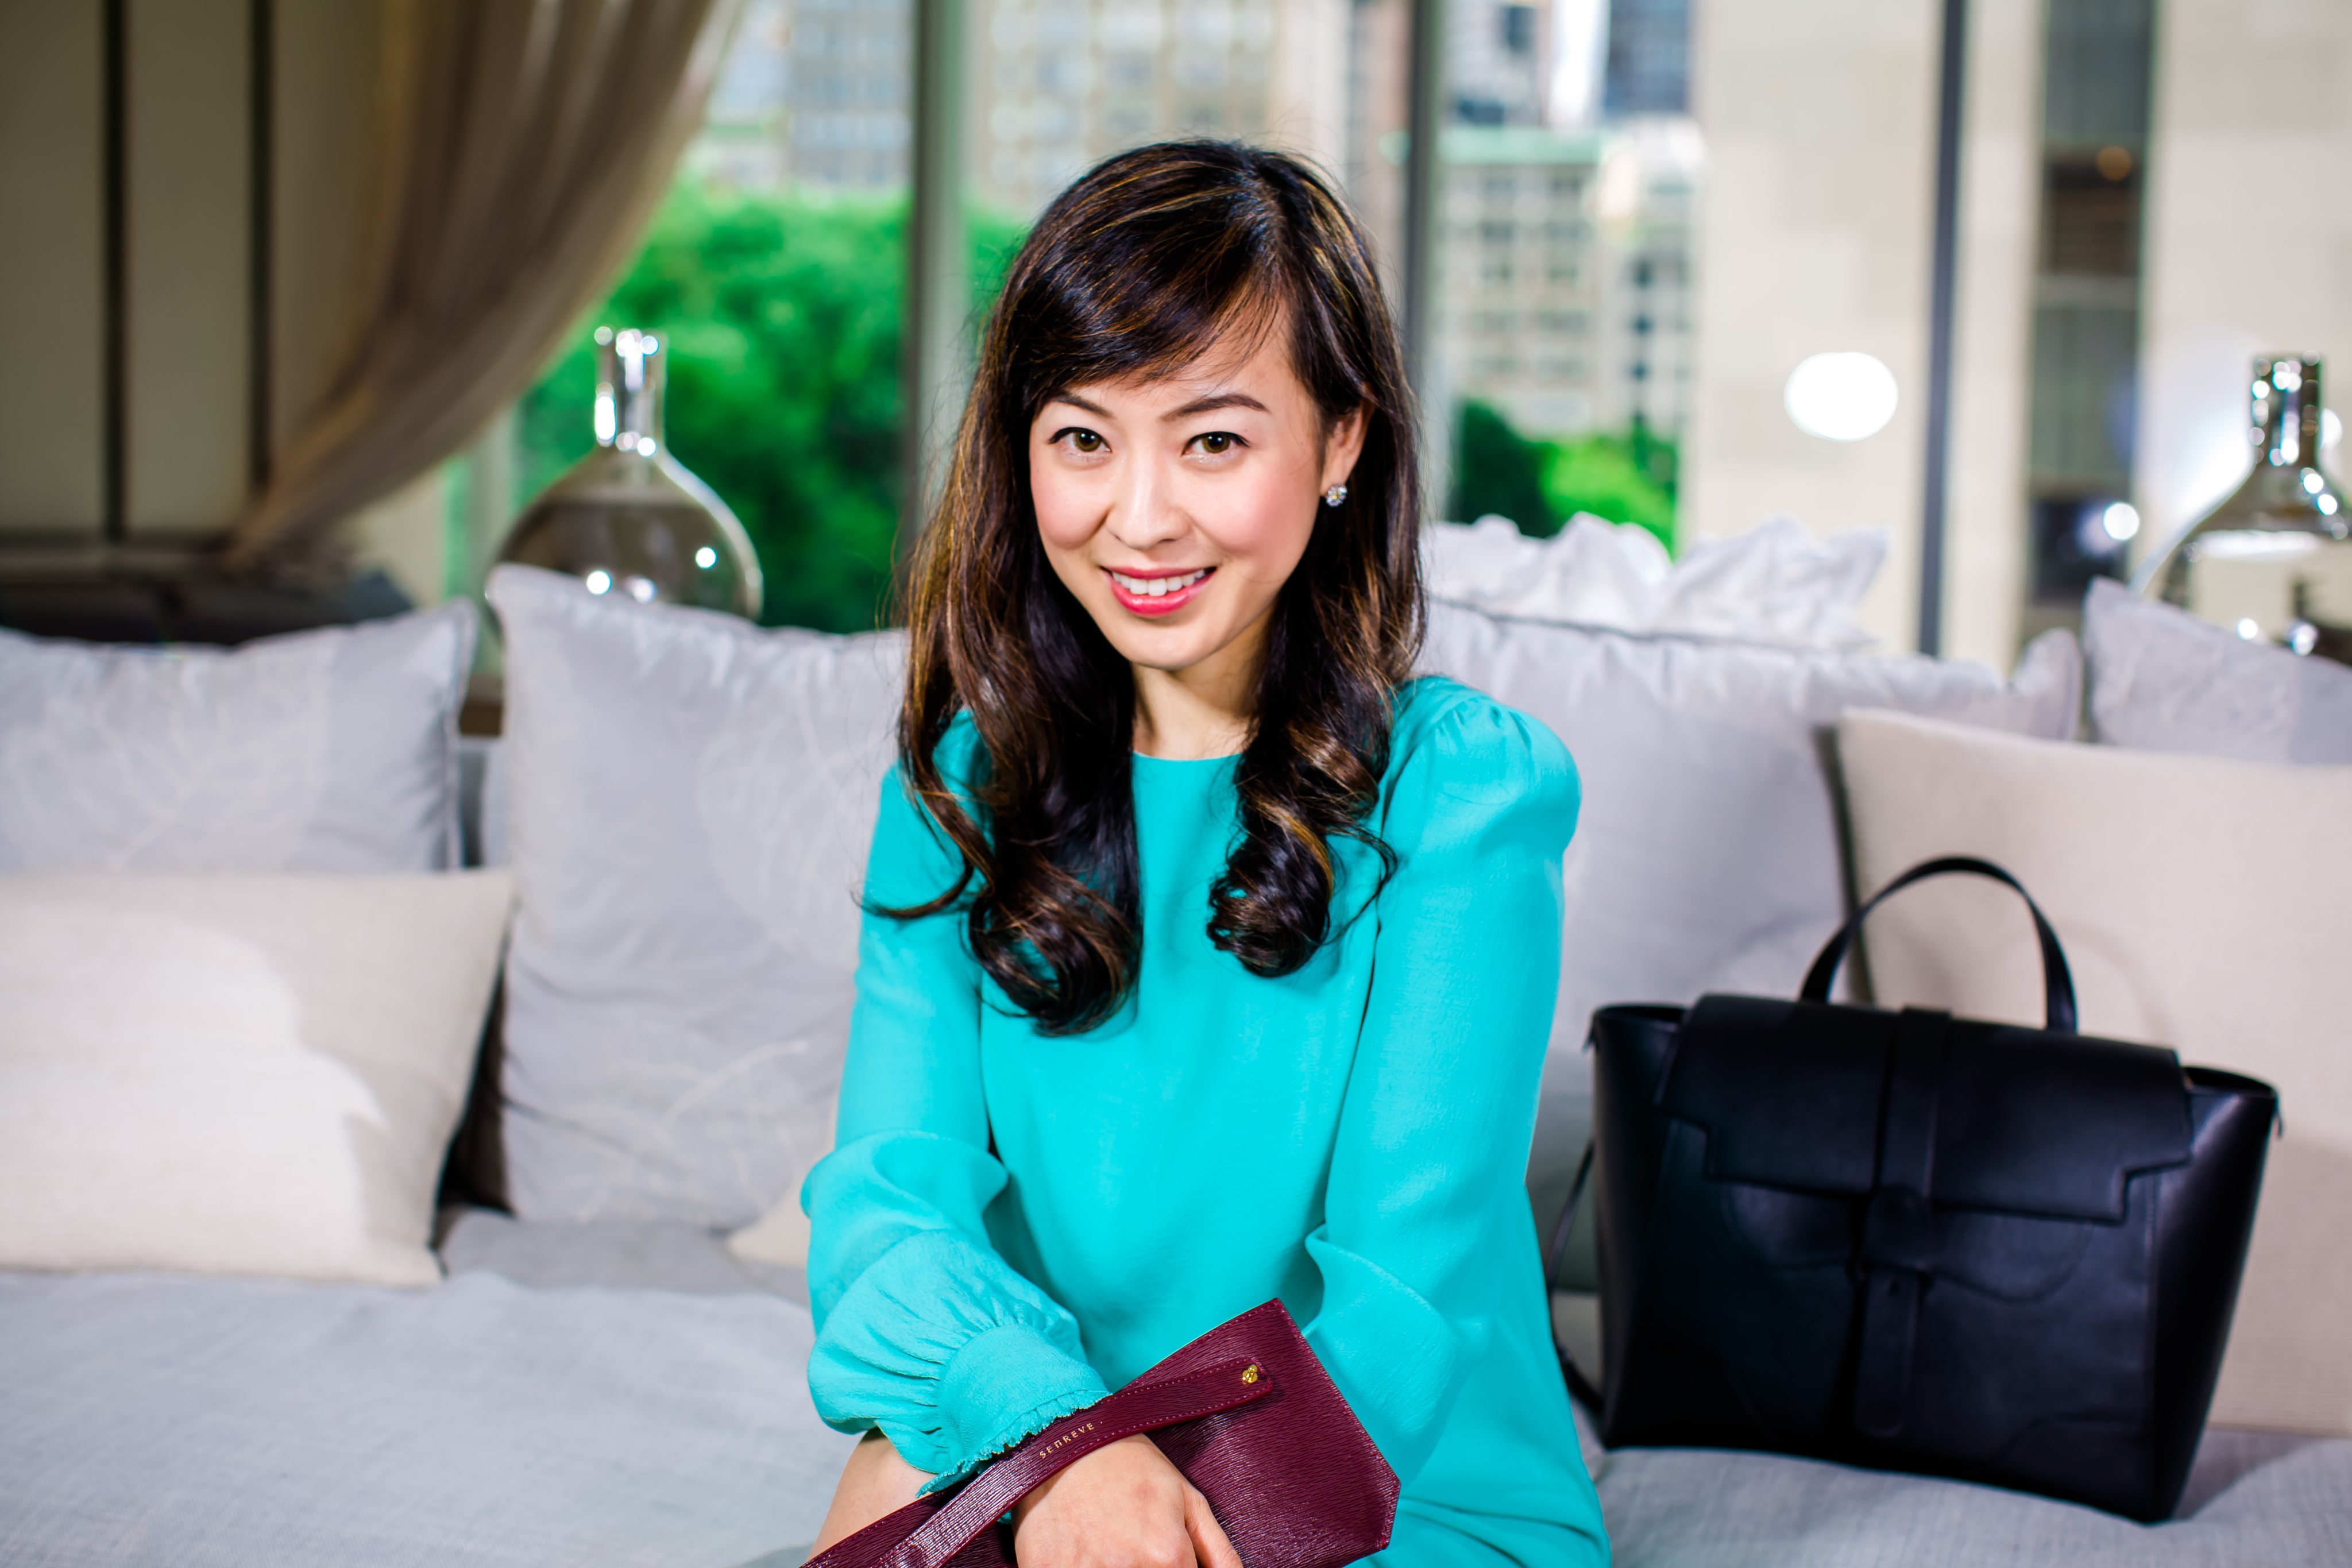 Coral Chung’s Italian luxury  brand pioneered the convertible Maestra Bag beloved by celebrities, but she also knows the importance of taking a digital detox. Photo: Handout